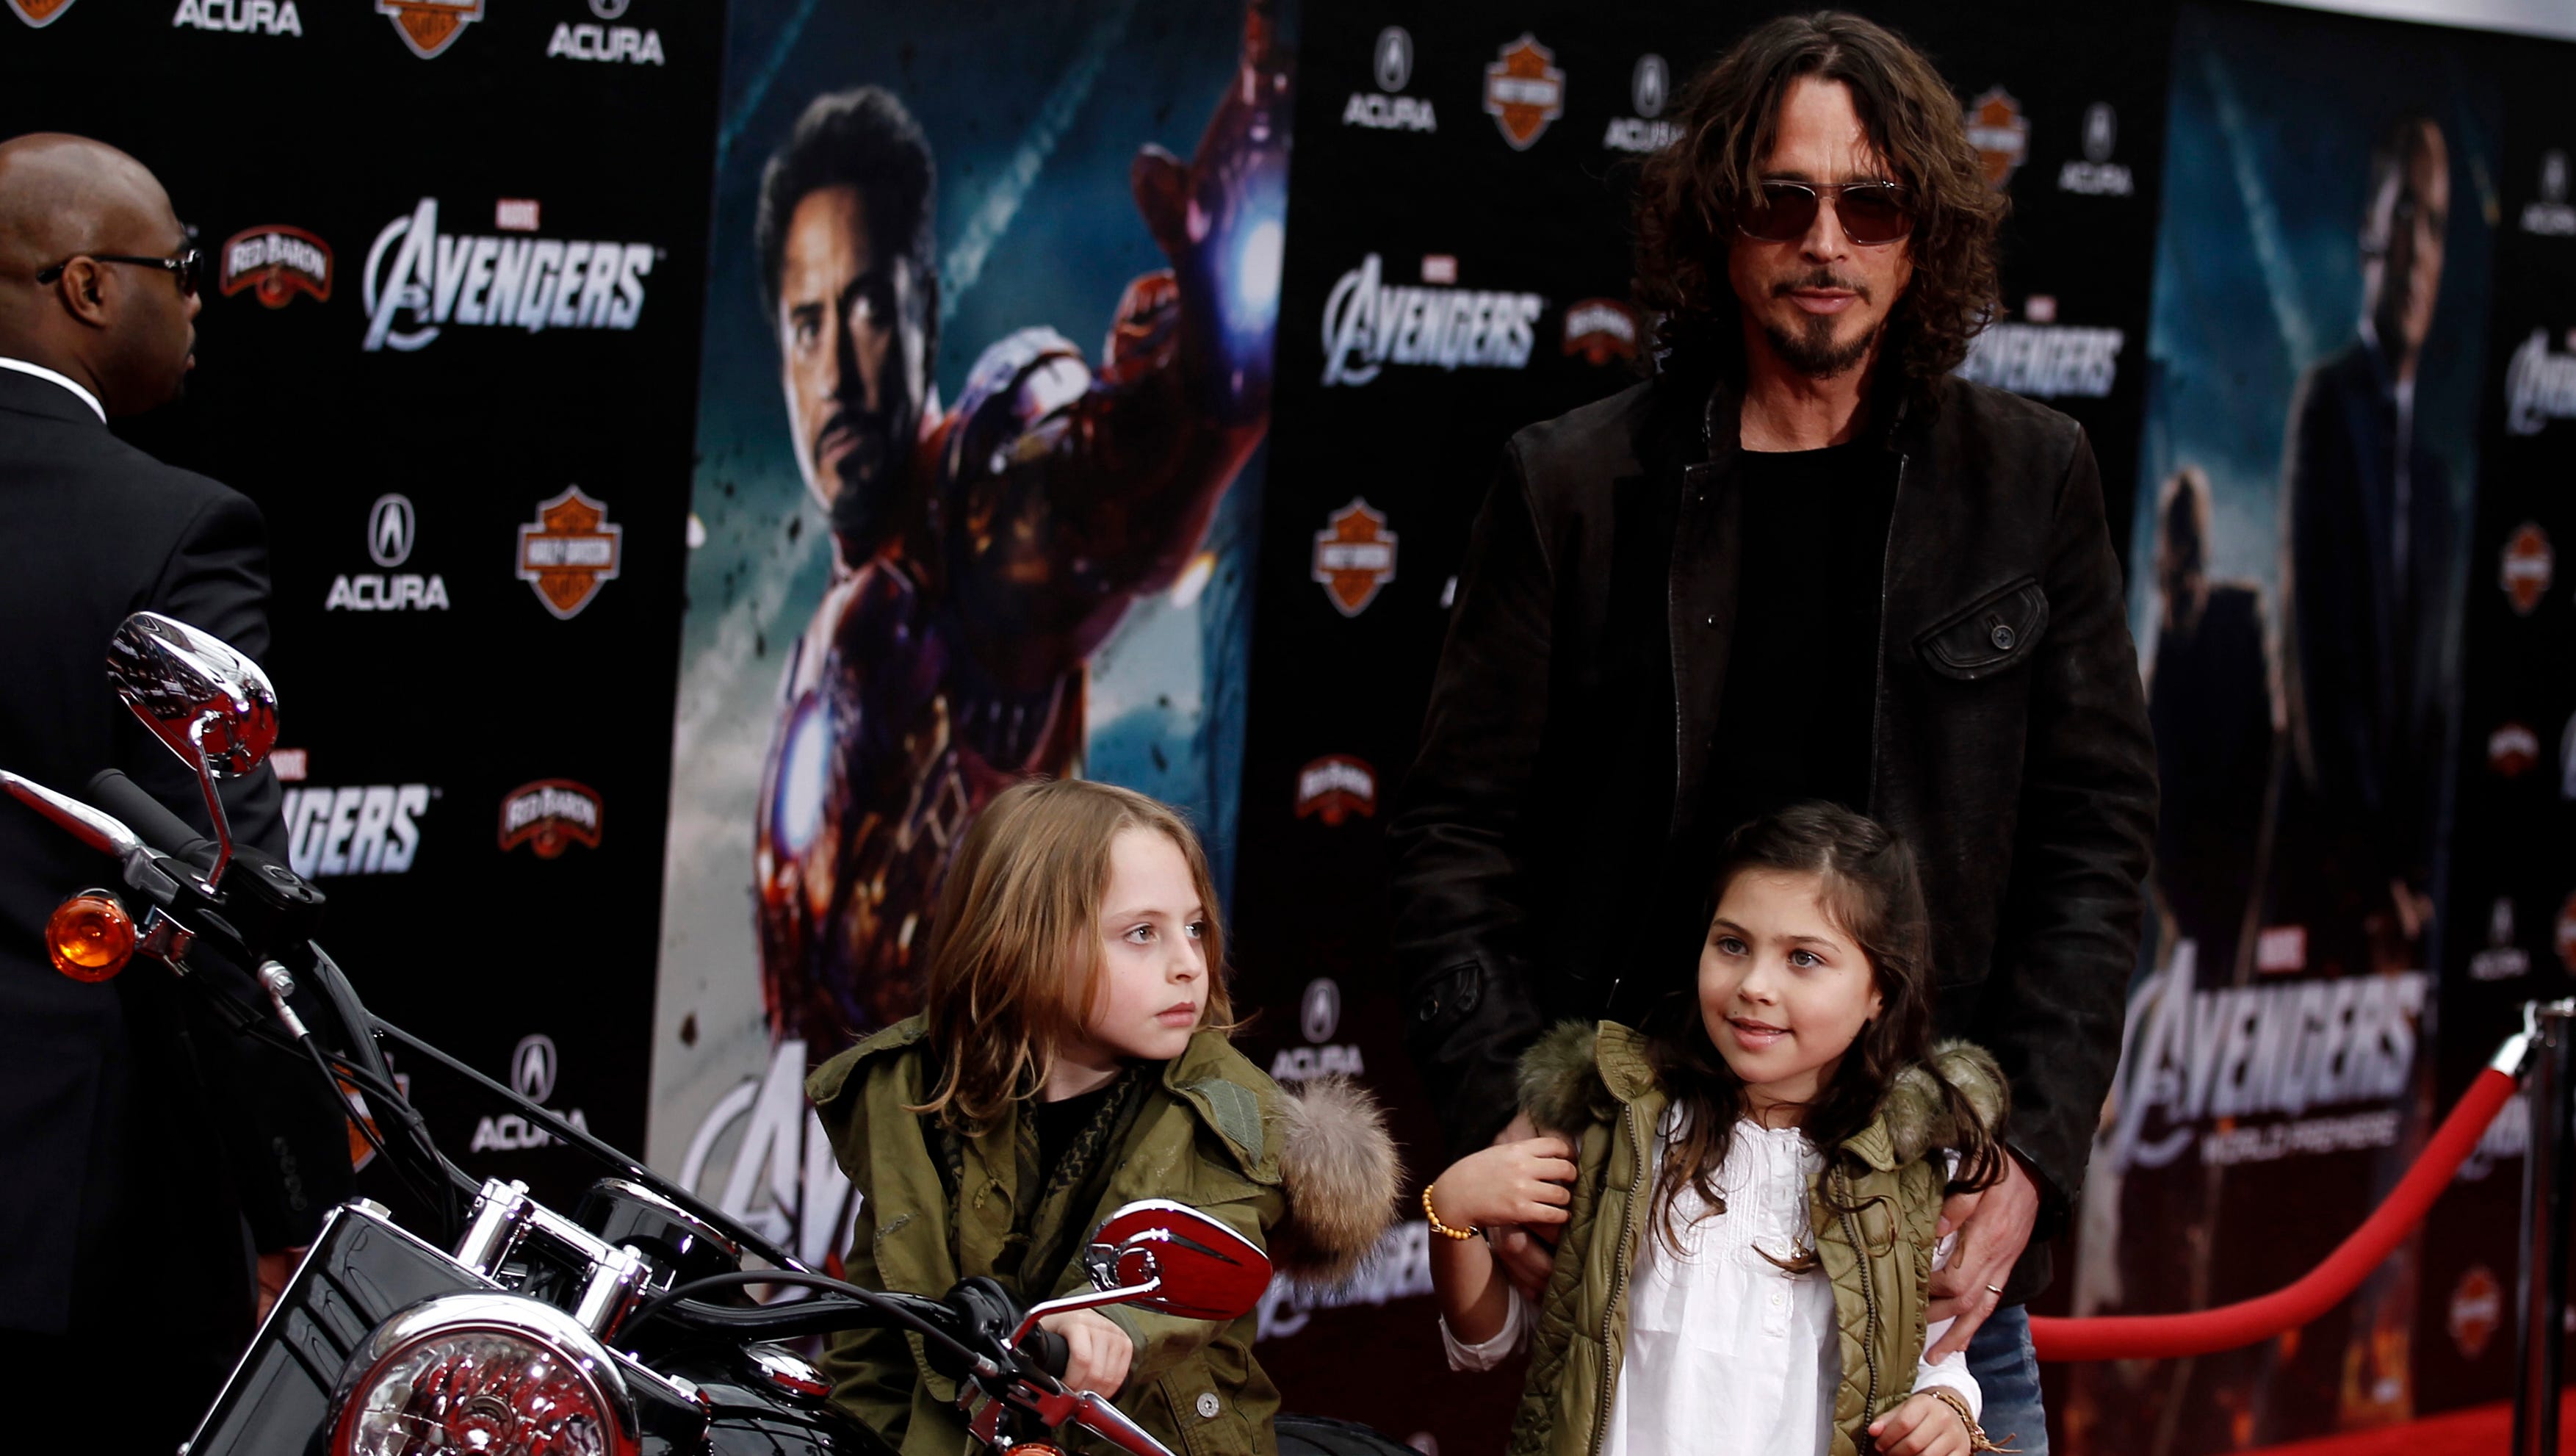 Chris Cornell and his family arrive at the premiere of "The Avengers" in Los Angeles,  April 11, 2012.